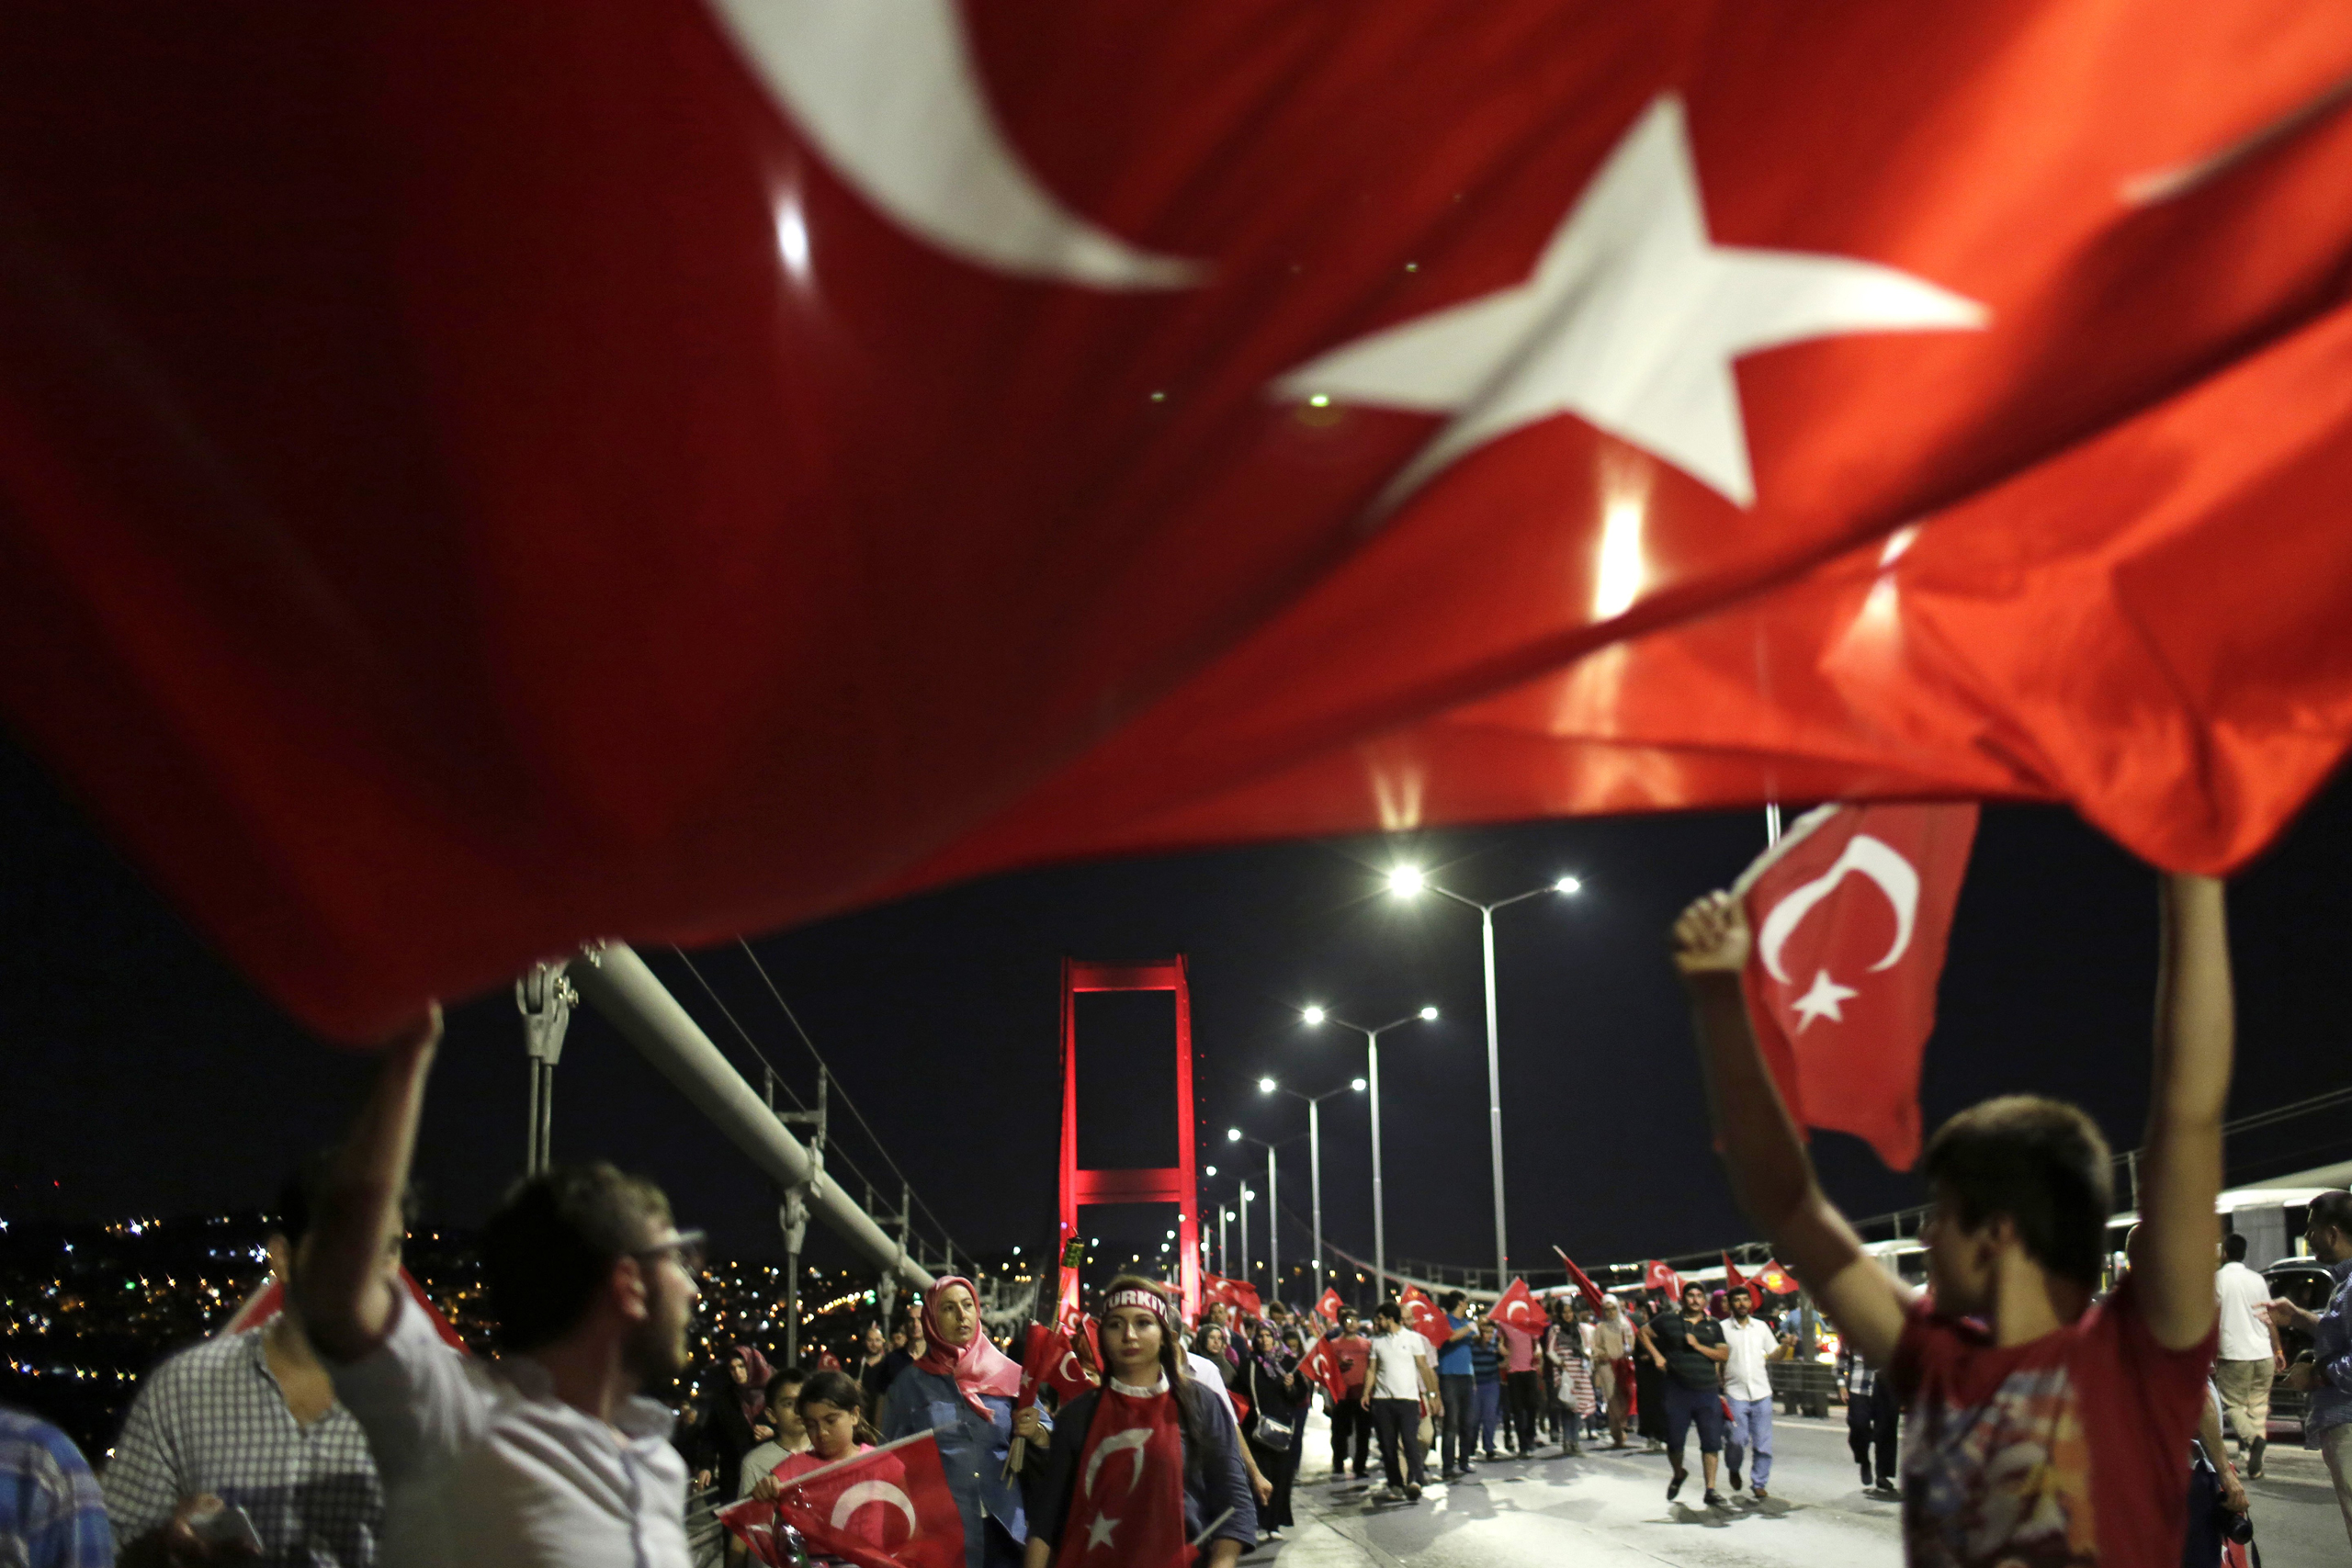 Pro-government supporters wave a Turkish flag as they protest on Istanbul's iconic Bosporus Bridge, late Thursday, July 21, 2016. Turkish lawmakers approved a three-month state of emergency, endorsing new powers for Turkey's President Recep Tayyip Erdogan that would allow him to expand a crackdown that has already included mass arrests and the closure of hundreds of schools, in the wake of the July 15 failed coup. (AP Photo/Petros Giannakouris) (Petros Giannakouris&mdash;AP)